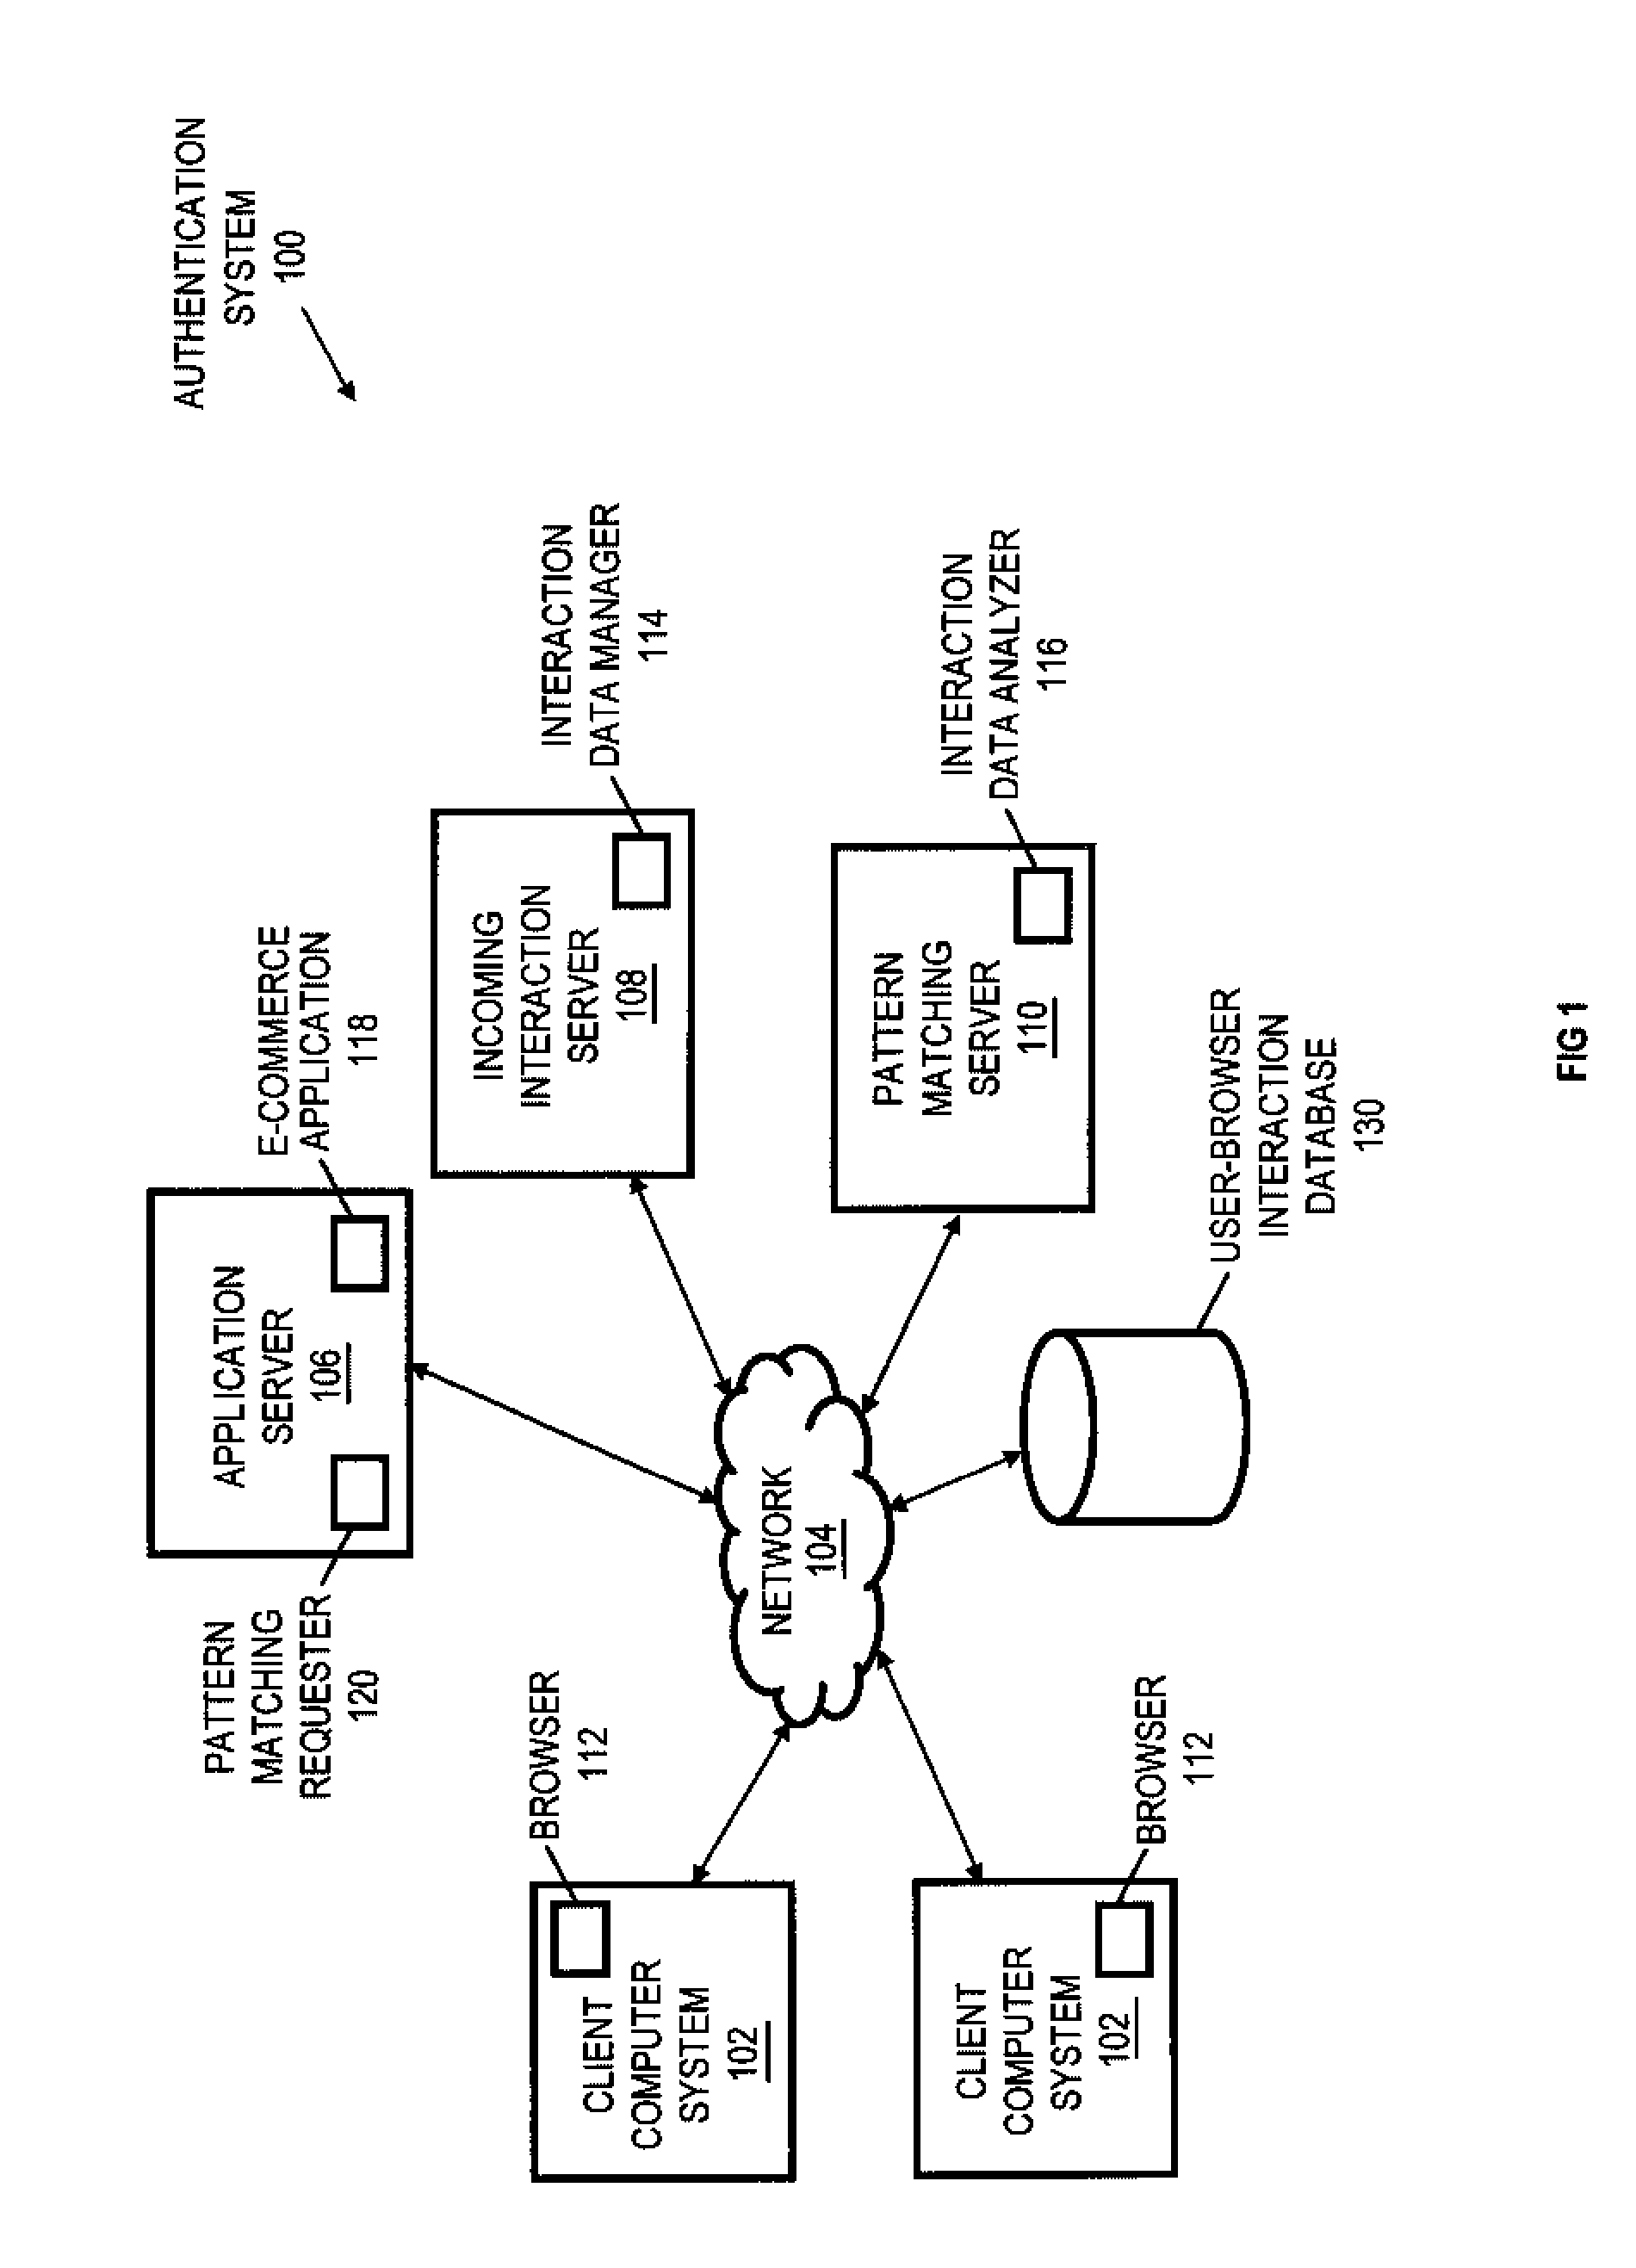 User-browser interaction analysis authentication system